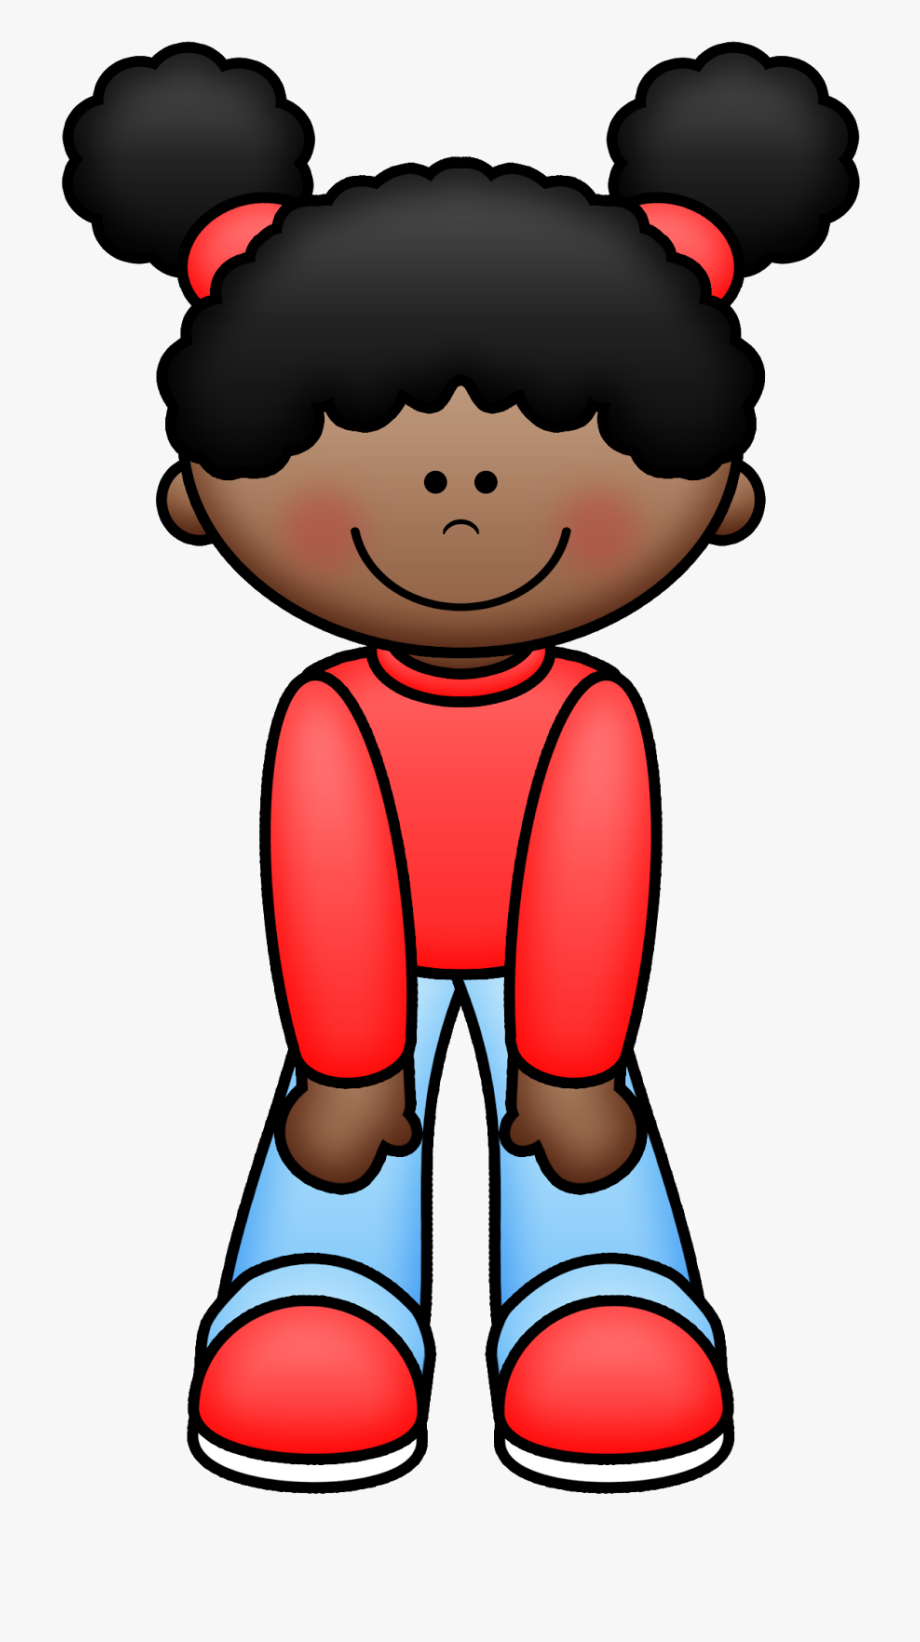 Clap child hands knees. Knee clipart hand on